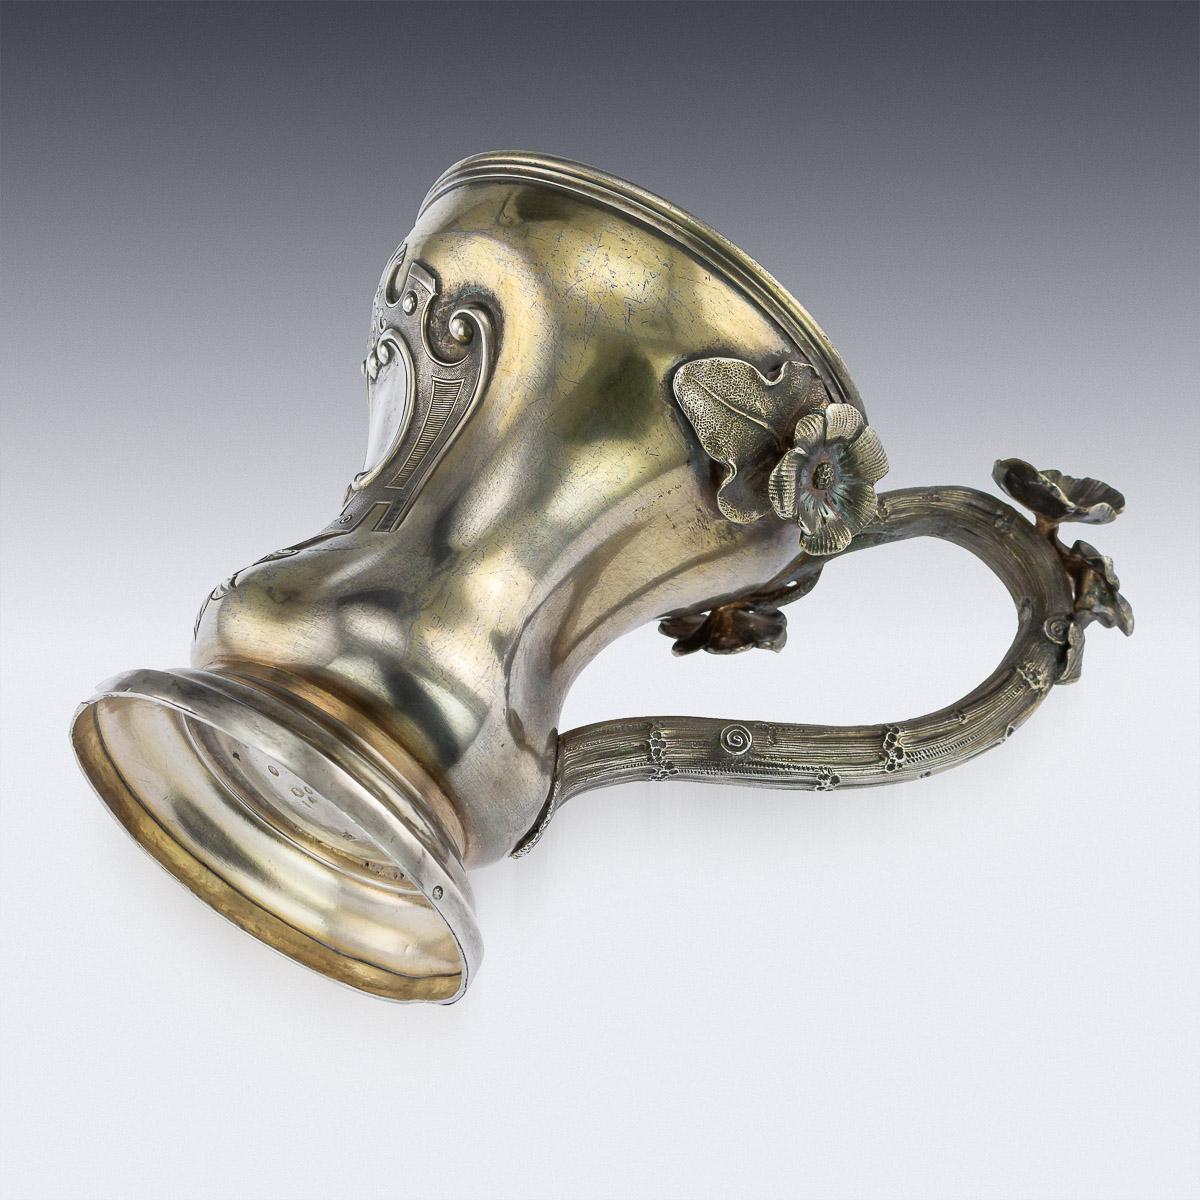 19th Century Russian Empire Solid Silver-Gilt Cup, St-Petersburg, circa 1849 2